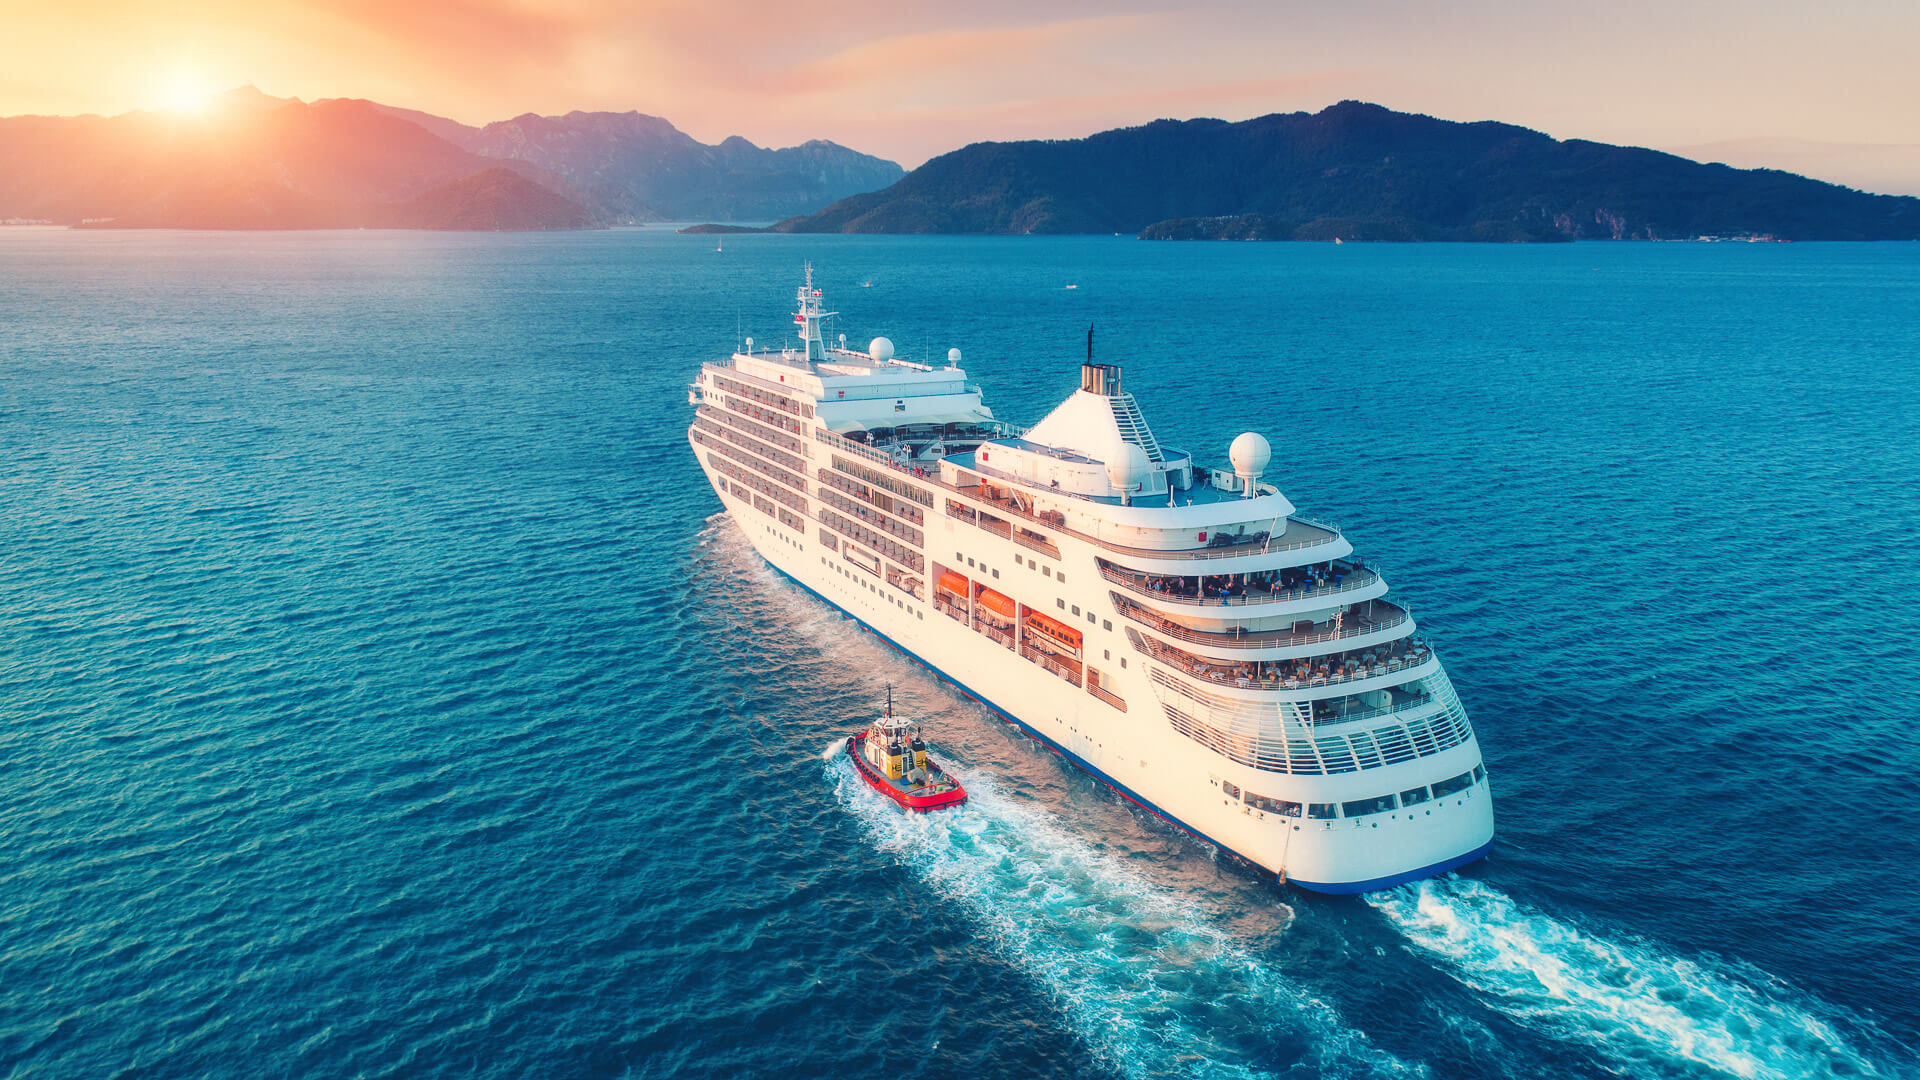 are cruise line stocks a good investment right now